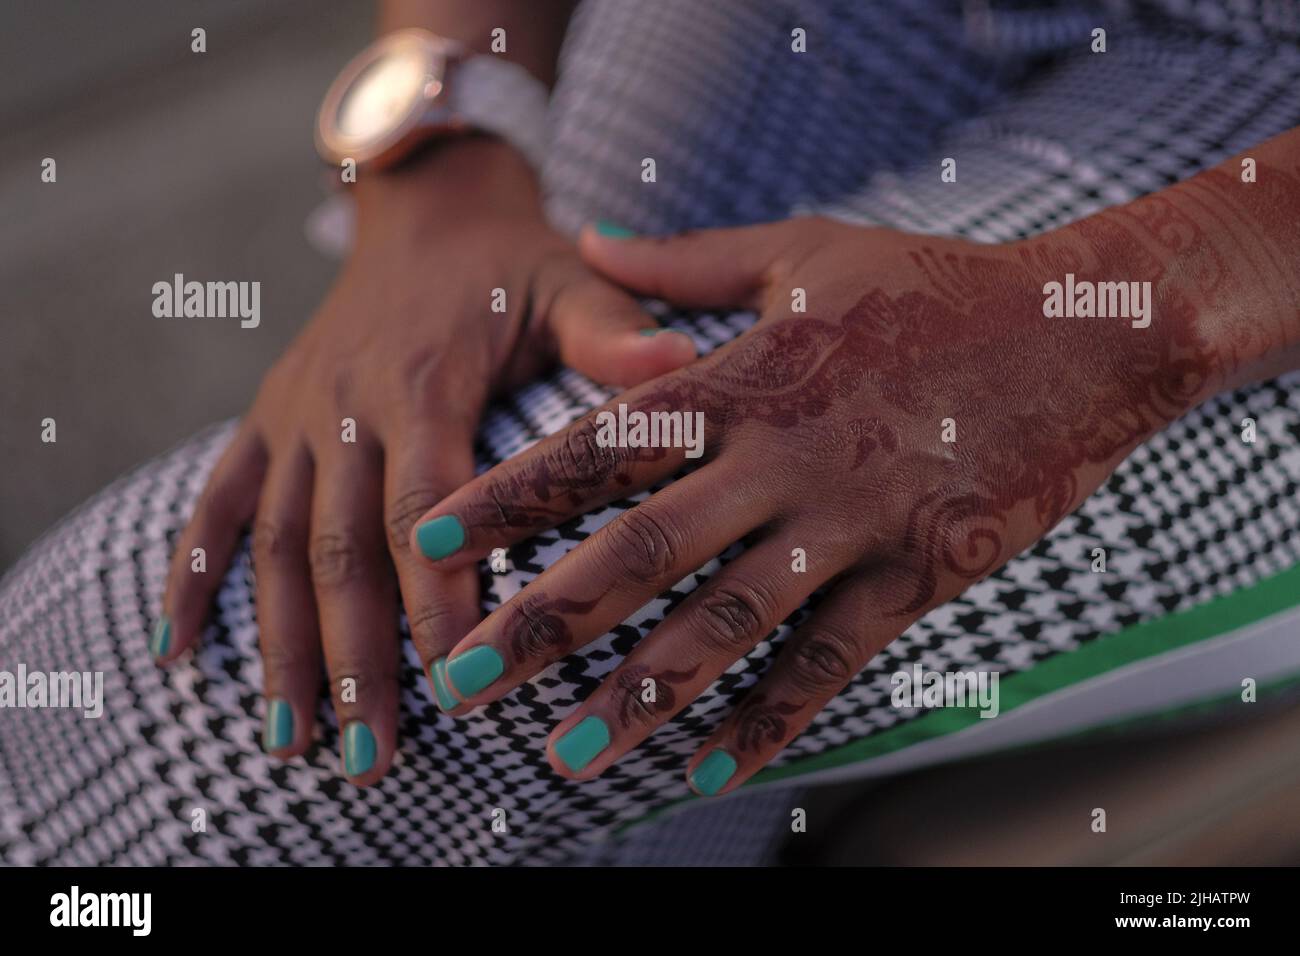 Black woman's hand with Arabic henna tattoo rests on crossed legs wearing black and white houndstooth pants with green stripe; nails are turquoise. Stock Photo